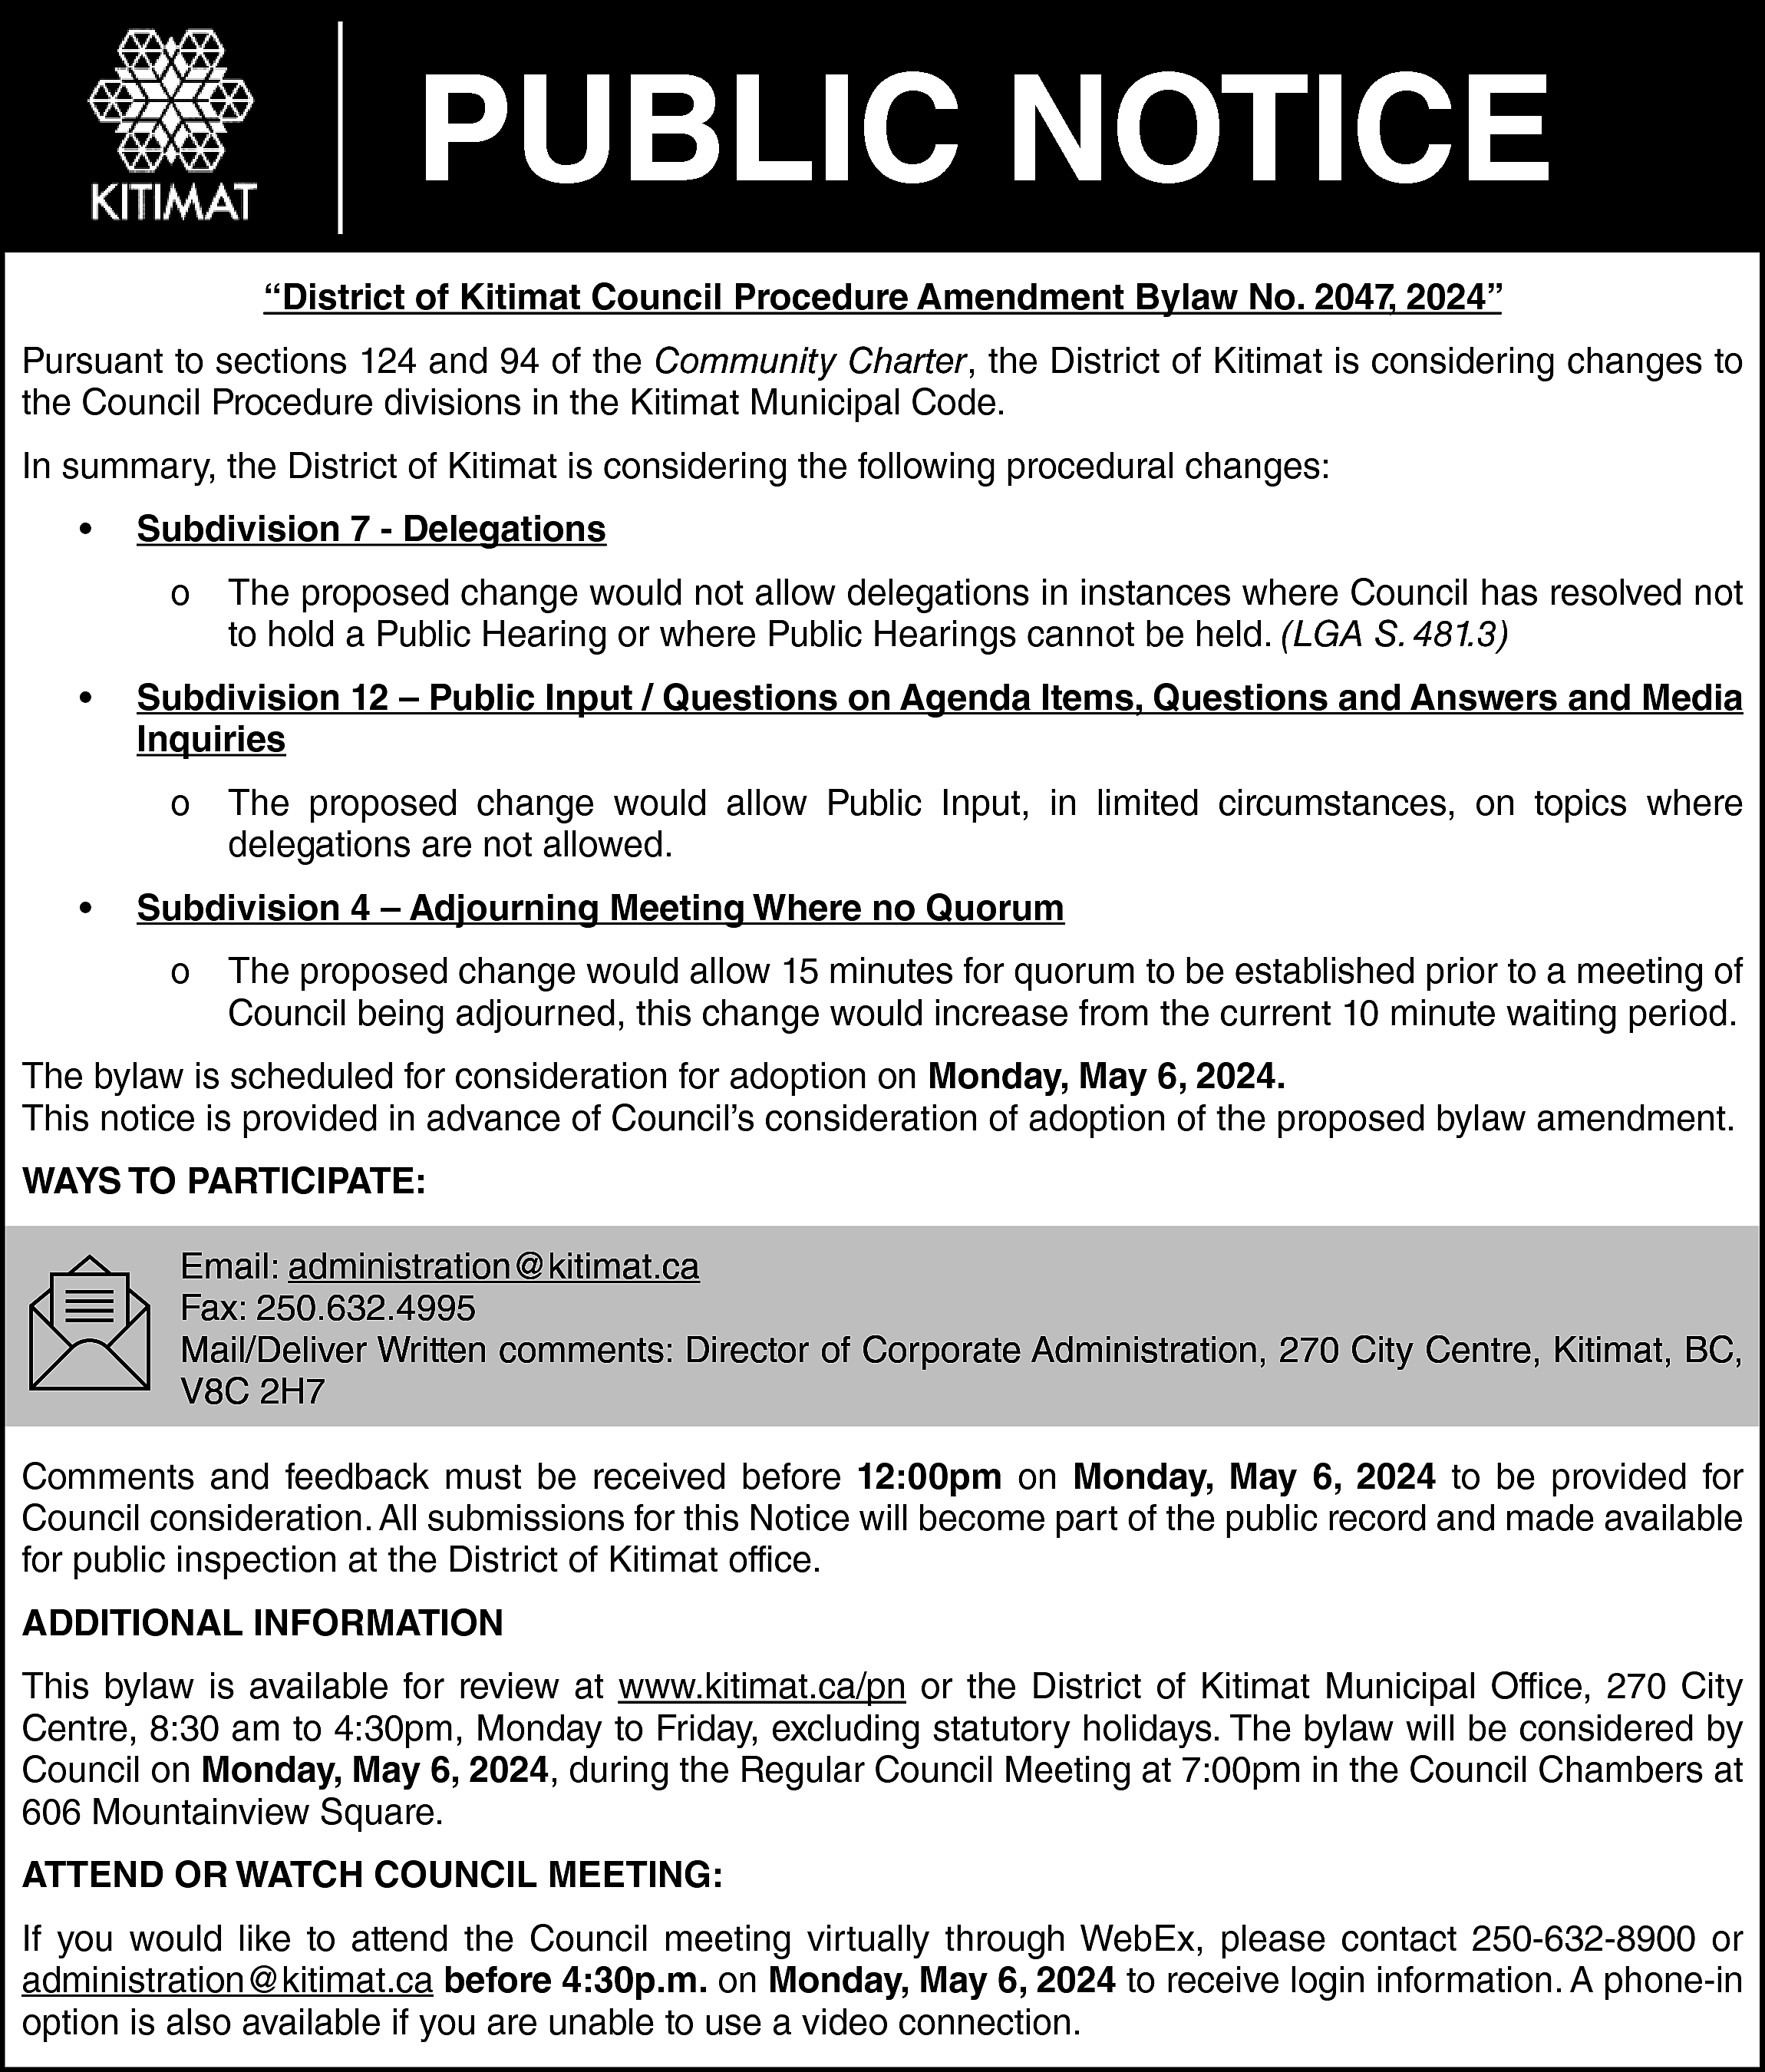 PUBLIC NOTICE <br>“District of Kitimat  PUBLIC NOTICE  “District of Kitimat Council Procedure Amendment Bylaw No. 2047, 2024”  Pursuant to sections 124 and 94 of the Community Charter, the District of Kitimat is considering changes to  the Council Procedure divisions in the Kitimat Municipal Code.  In summary, the District of Kitimat is considering the following procedural changes:  •    Subdivision 7 - Delegations  o    •    Subdivision 12 – Public Input / Questions on Agenda Items, Questions and Answers and Media  Inquiries  o    •    The proposed change would not allow delegations in instances where Council has resolved not  to hold a Public Hearing or where Public Hearings cannot be held. (LGA S. 481.3)    The proposed change would allow Public Input, in limited circumstances, on topics where  delegations are not allowed.    Subdivision 4 – Adjourning Meeting Where no Quorum  o    The proposed change would allow 15 minutes for quorum to be established prior to a meeting of  Council being adjourned, this change would increase from the current 10 minute waiting period.    The bylaw is scheduled for consideration for adoption on Monday, May 6, 2024.  This notice is provided in advance of Council’s consideration of adoption of the proposed bylaw amendment.  WAYS TO PARTICIPATE:  Email: administration@kitimat.ca  Fax: 250.632.4995  Mail/Deliver Written comments: Director of Corporate Administration, 270 City Centre, Kitimat, BC,  V8C 2H7  Comments and feedback must be received before 12:00pm on Monday, May 6, 2024 to be provided for  Council consideration. All submissions for this Notice will become part of the public record and made available  for public inspection at the District of Kitimat office.  ADDITIONAL INFORMATION  This bylaw is available for review at www.kitimat.ca/pn or the District of Kitimat Municipal Office, 270 City  Centre, 8:30 am to 4:30pm, Monday to Friday, excluding statutory holidays. The bylaw will be considered by  Council on Monday, May 6, 2024, during the Regular Council Meeting at 7:00pm in the Council Chambers at  606 Mountainview Square.  ATTEND OR WATCH COUNCIL MEETING:  If you would like to attend the Council meeting virtually through WebEx, please contact 250-632-8900 or  administration@kitimat.ca before 4:30p.m. on Monday, May 6, 2024 to receive login information. A phone-in  option is also available if you are unable to use a video connection.    